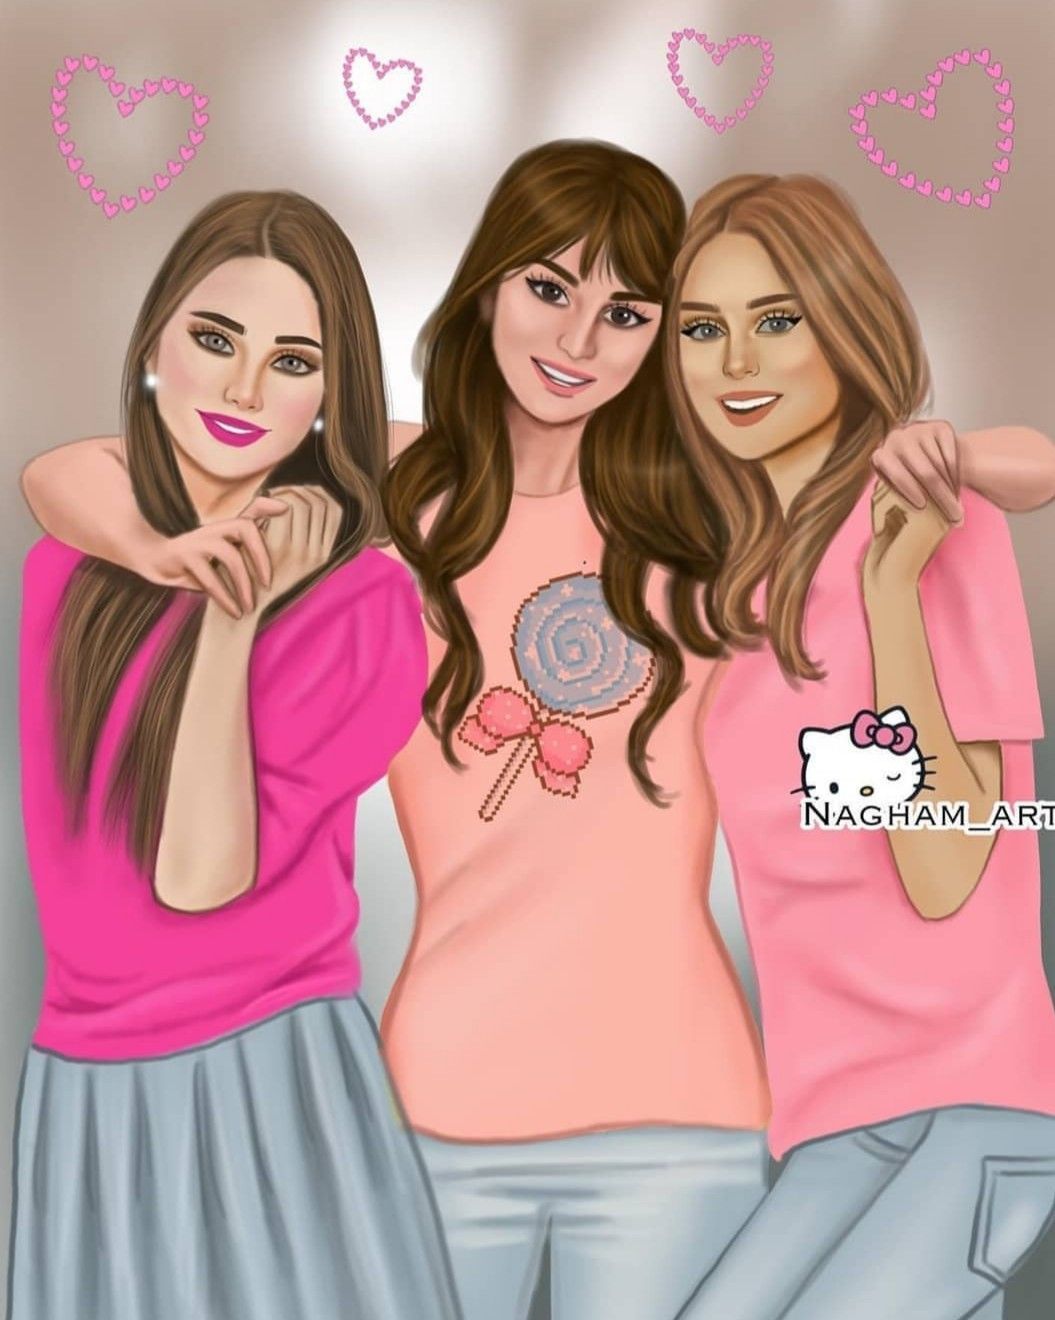 Friendship 3 Bff Drawings - Goimages Domain